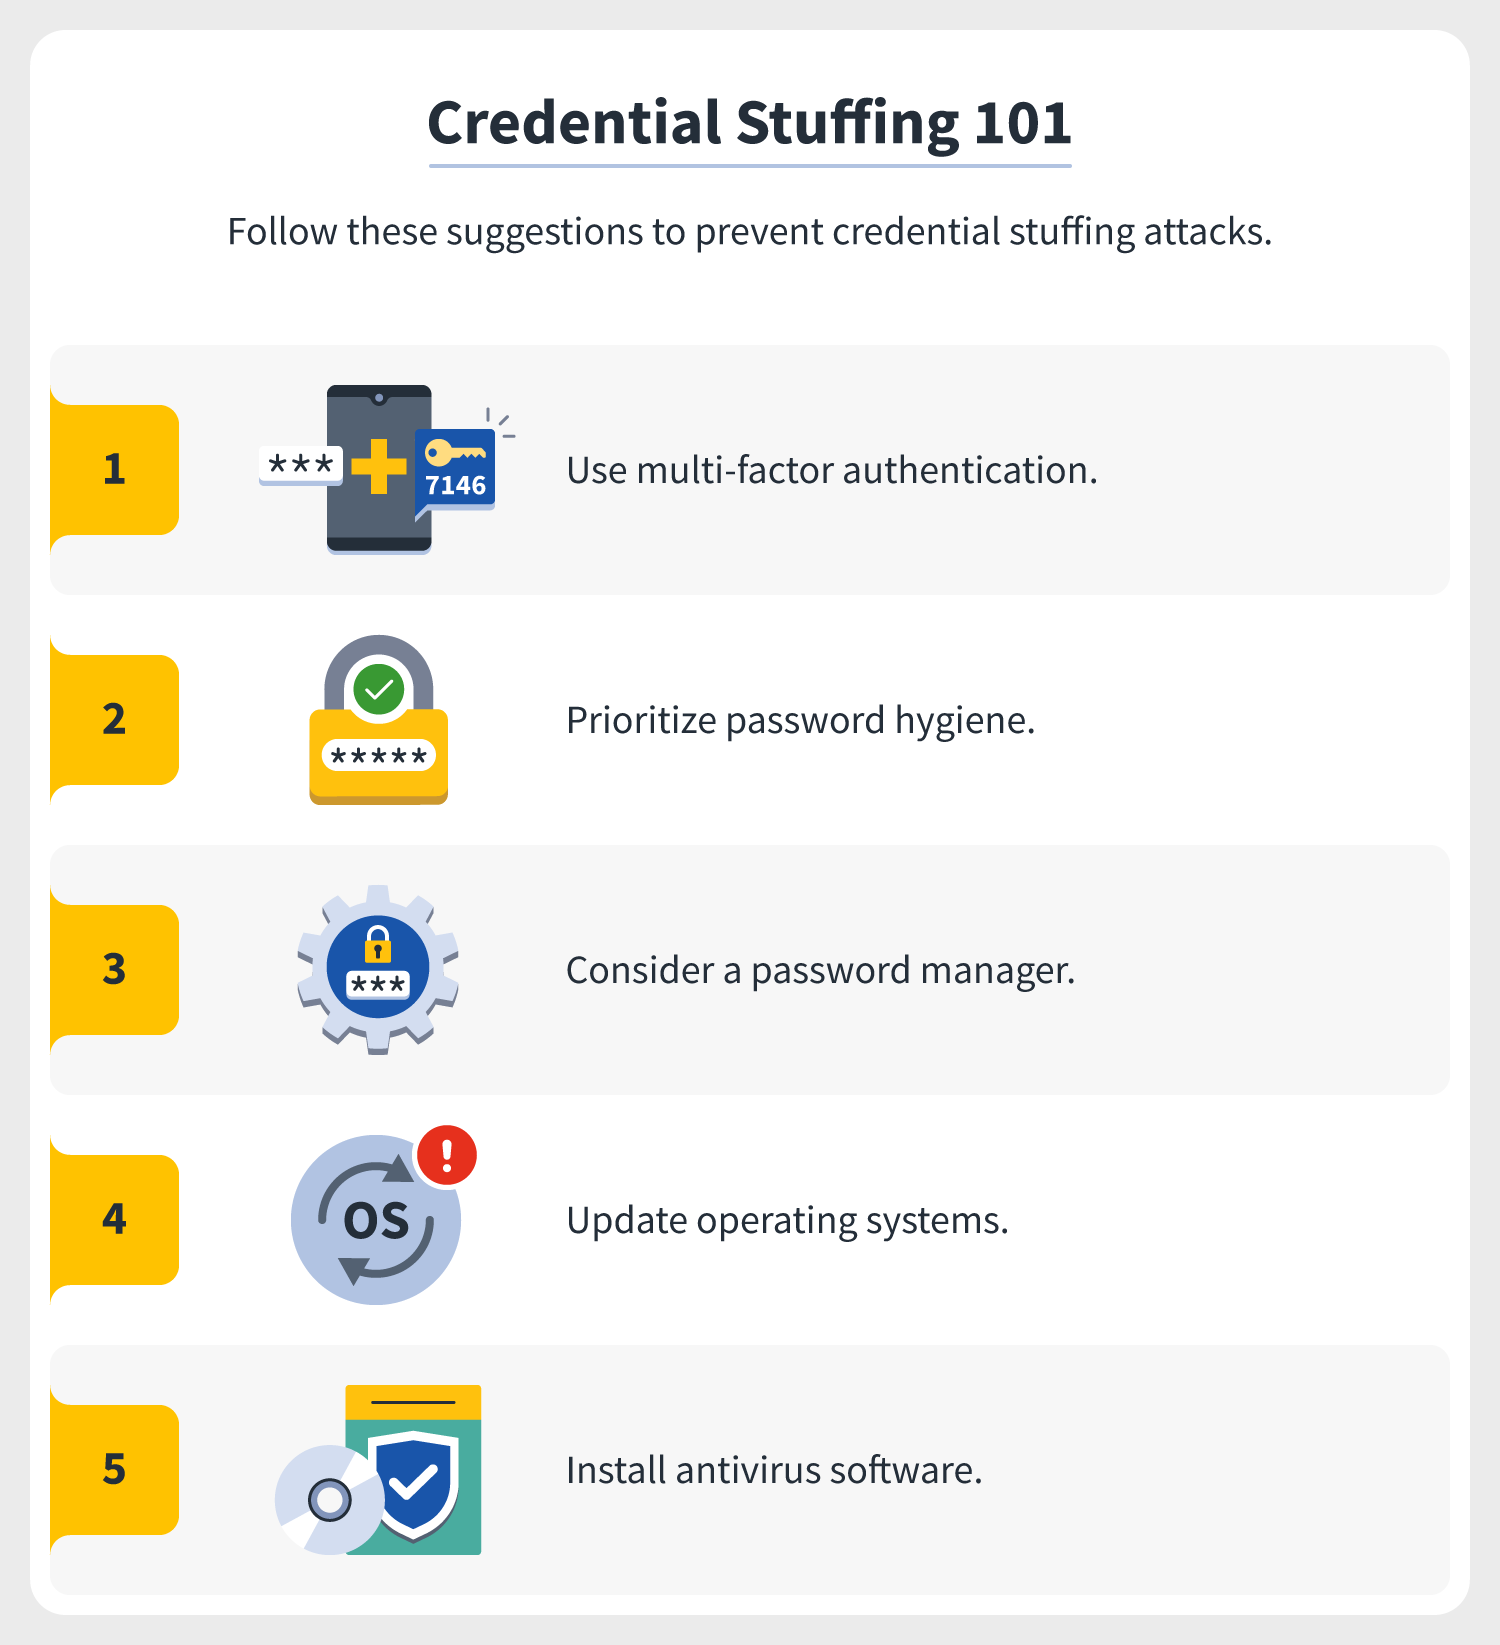  To show online users how to protect themselves against credential stuffing attacks, a bulleted list of useful suggestions is listed.